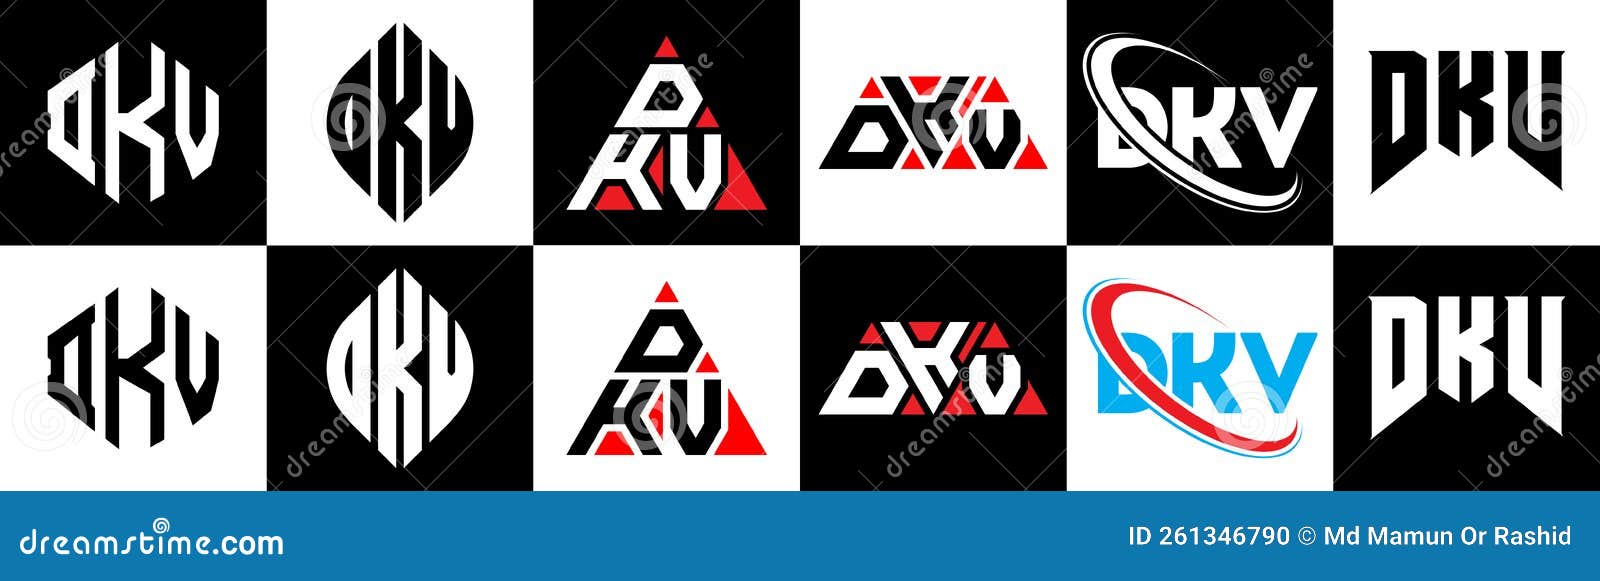 Dkv Letter Logo Design In Six Style Dkv Polygon Circle Triangle